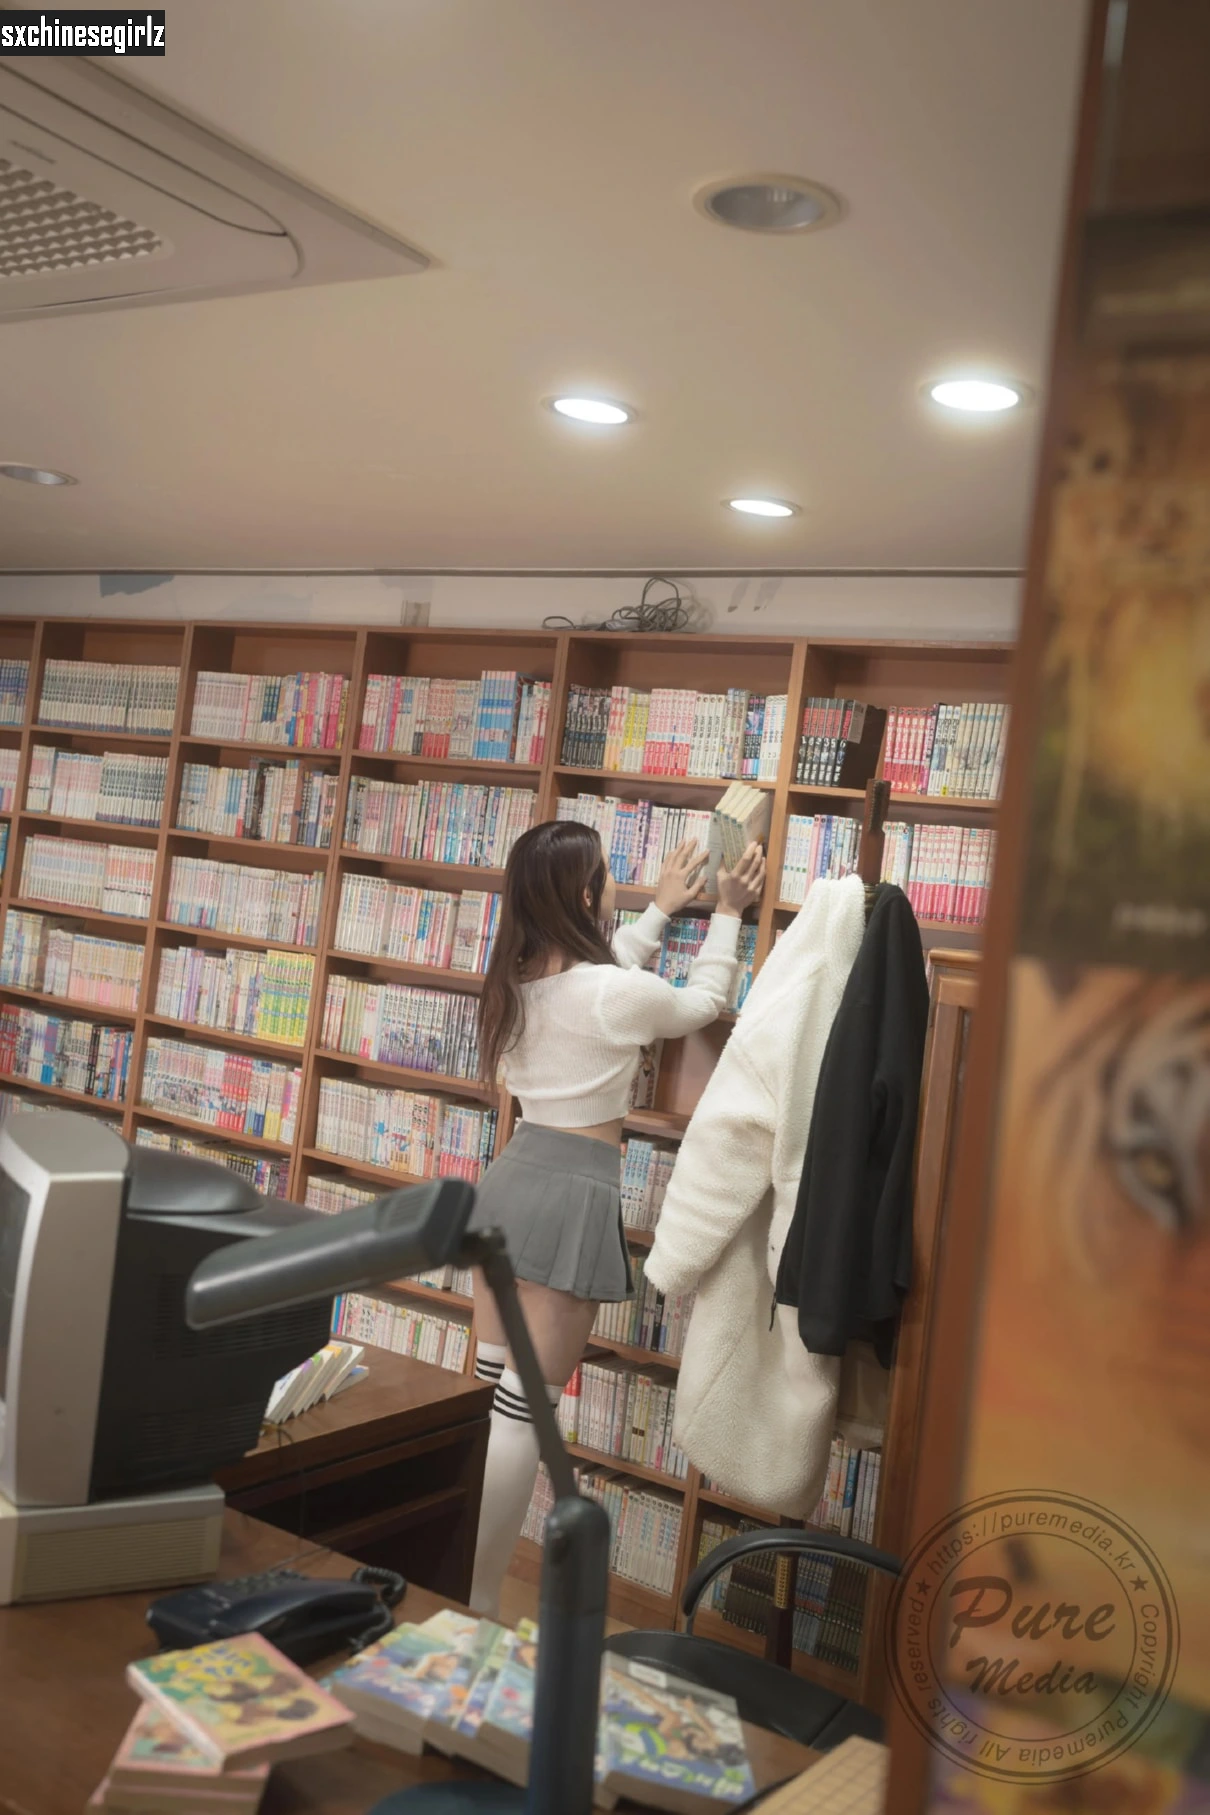 Pure Media Vol.273 Yeha (예하) - Dreaming with library girl